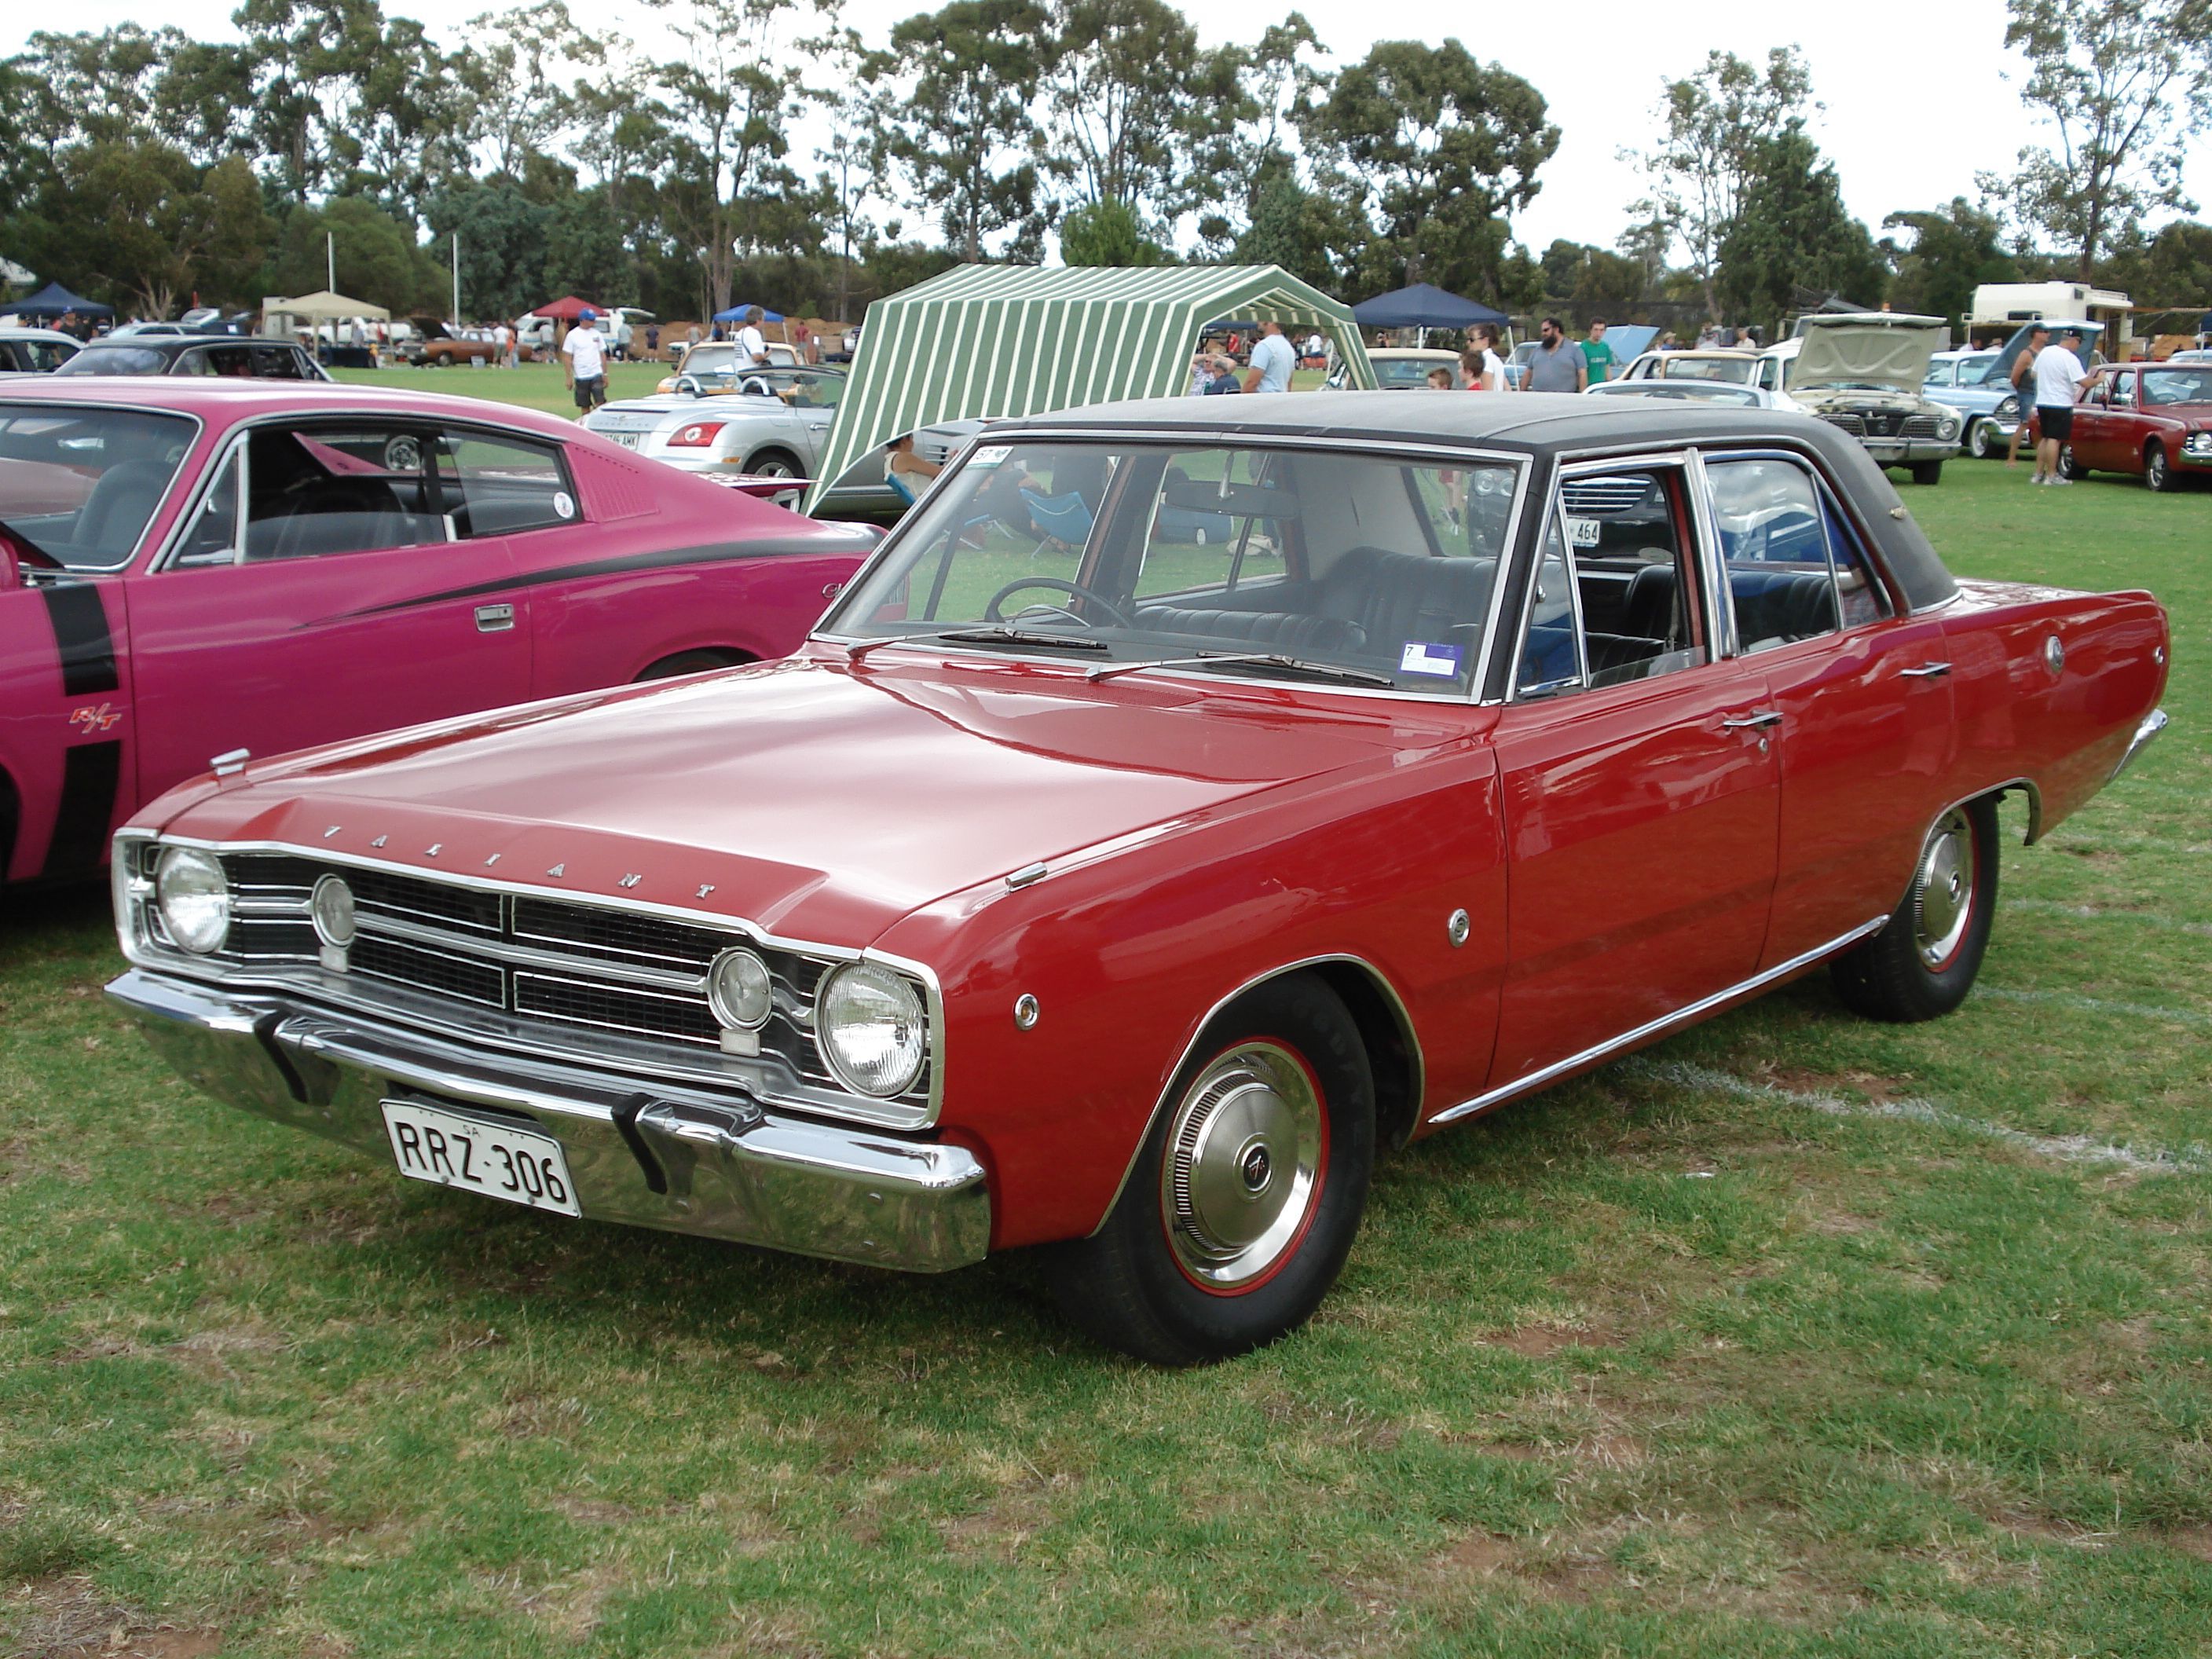 Plymouth Valiant At Car Show In South Africa